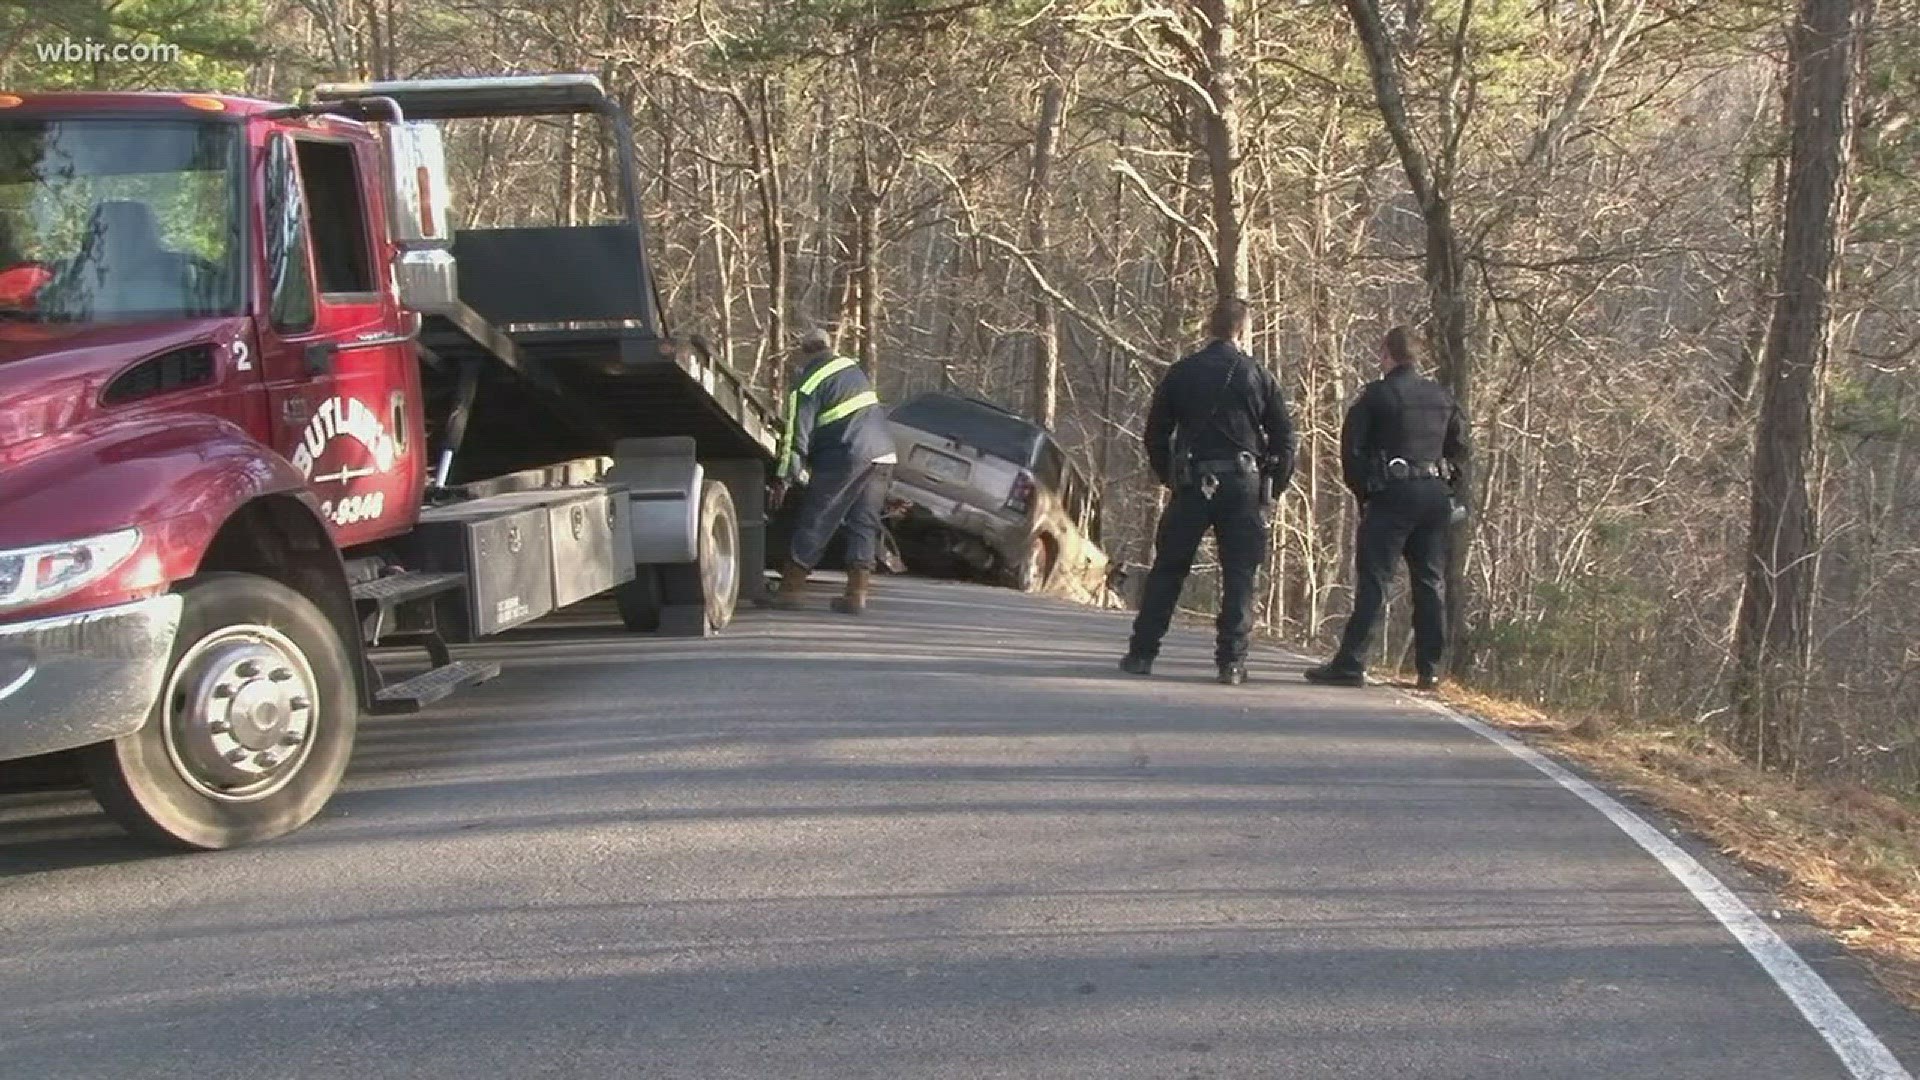 The crash happened around 3 p.m. in the Top of the World area of Blount County between Foothills Parkway and Chilhowee View Road, according to dispatch.